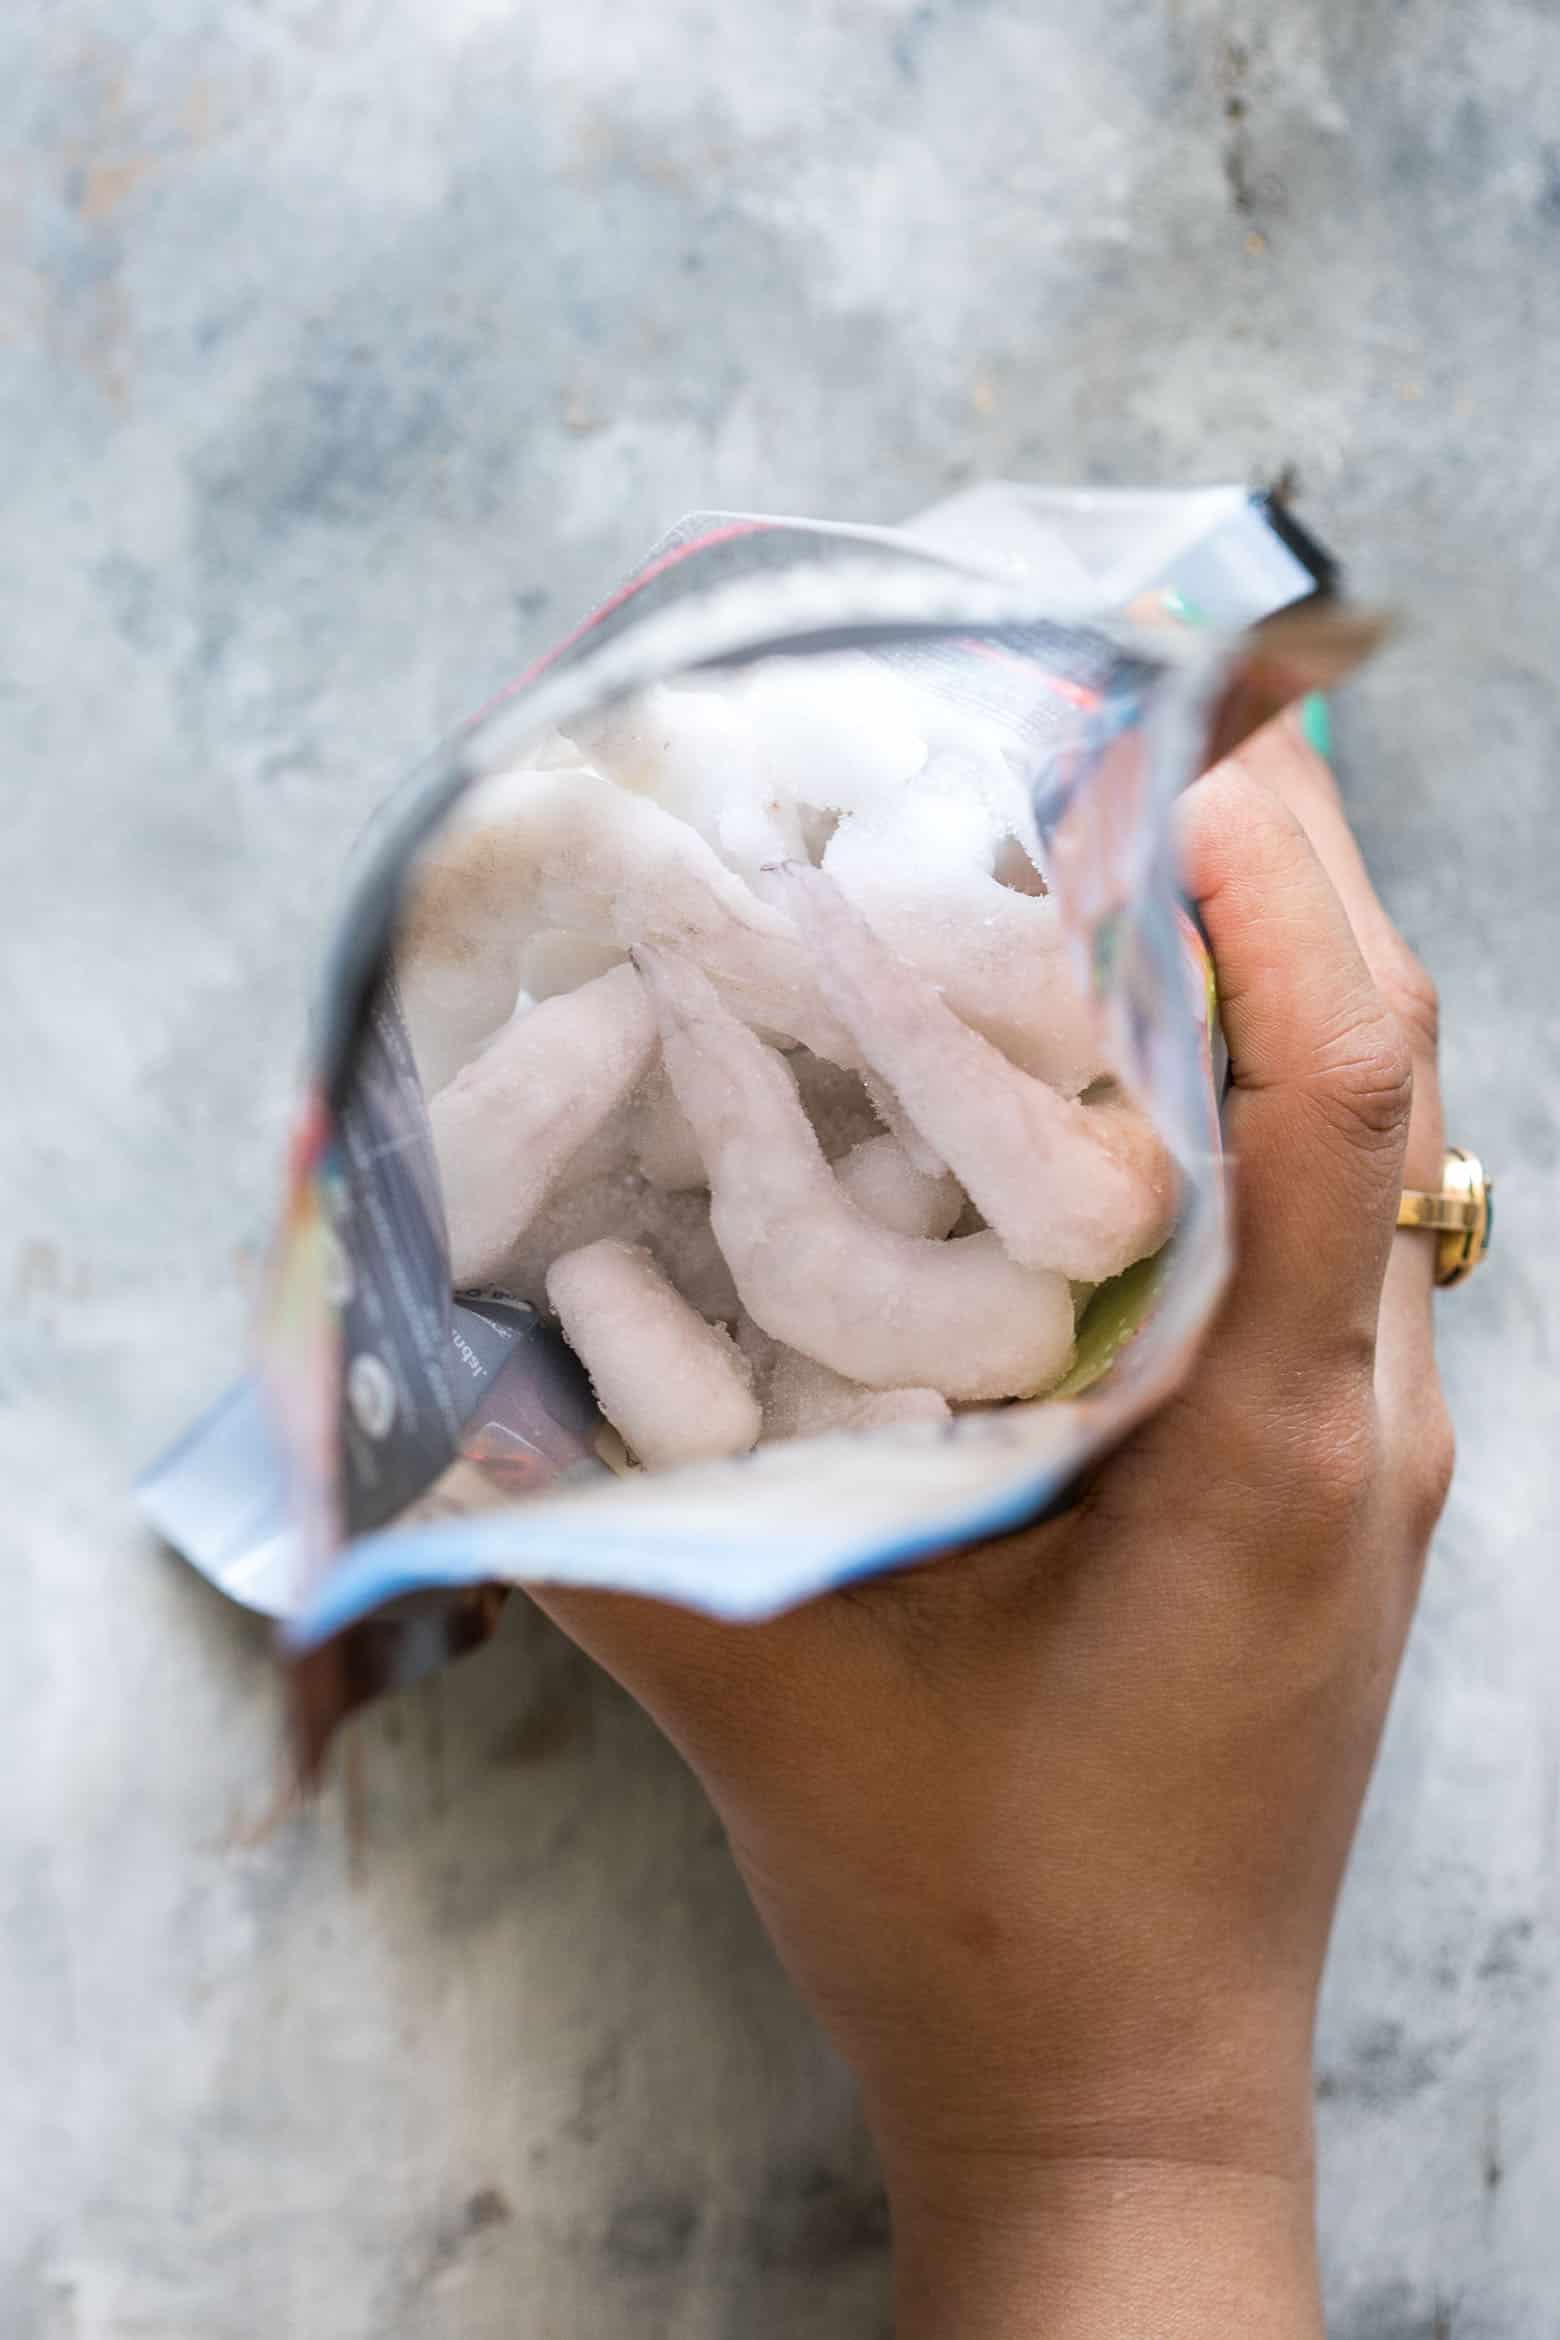 Learn how to defrost prawns safely with four simple methods that are used by chefs and experts. These methods can be used to defrost shrimp, and other seafood as well.